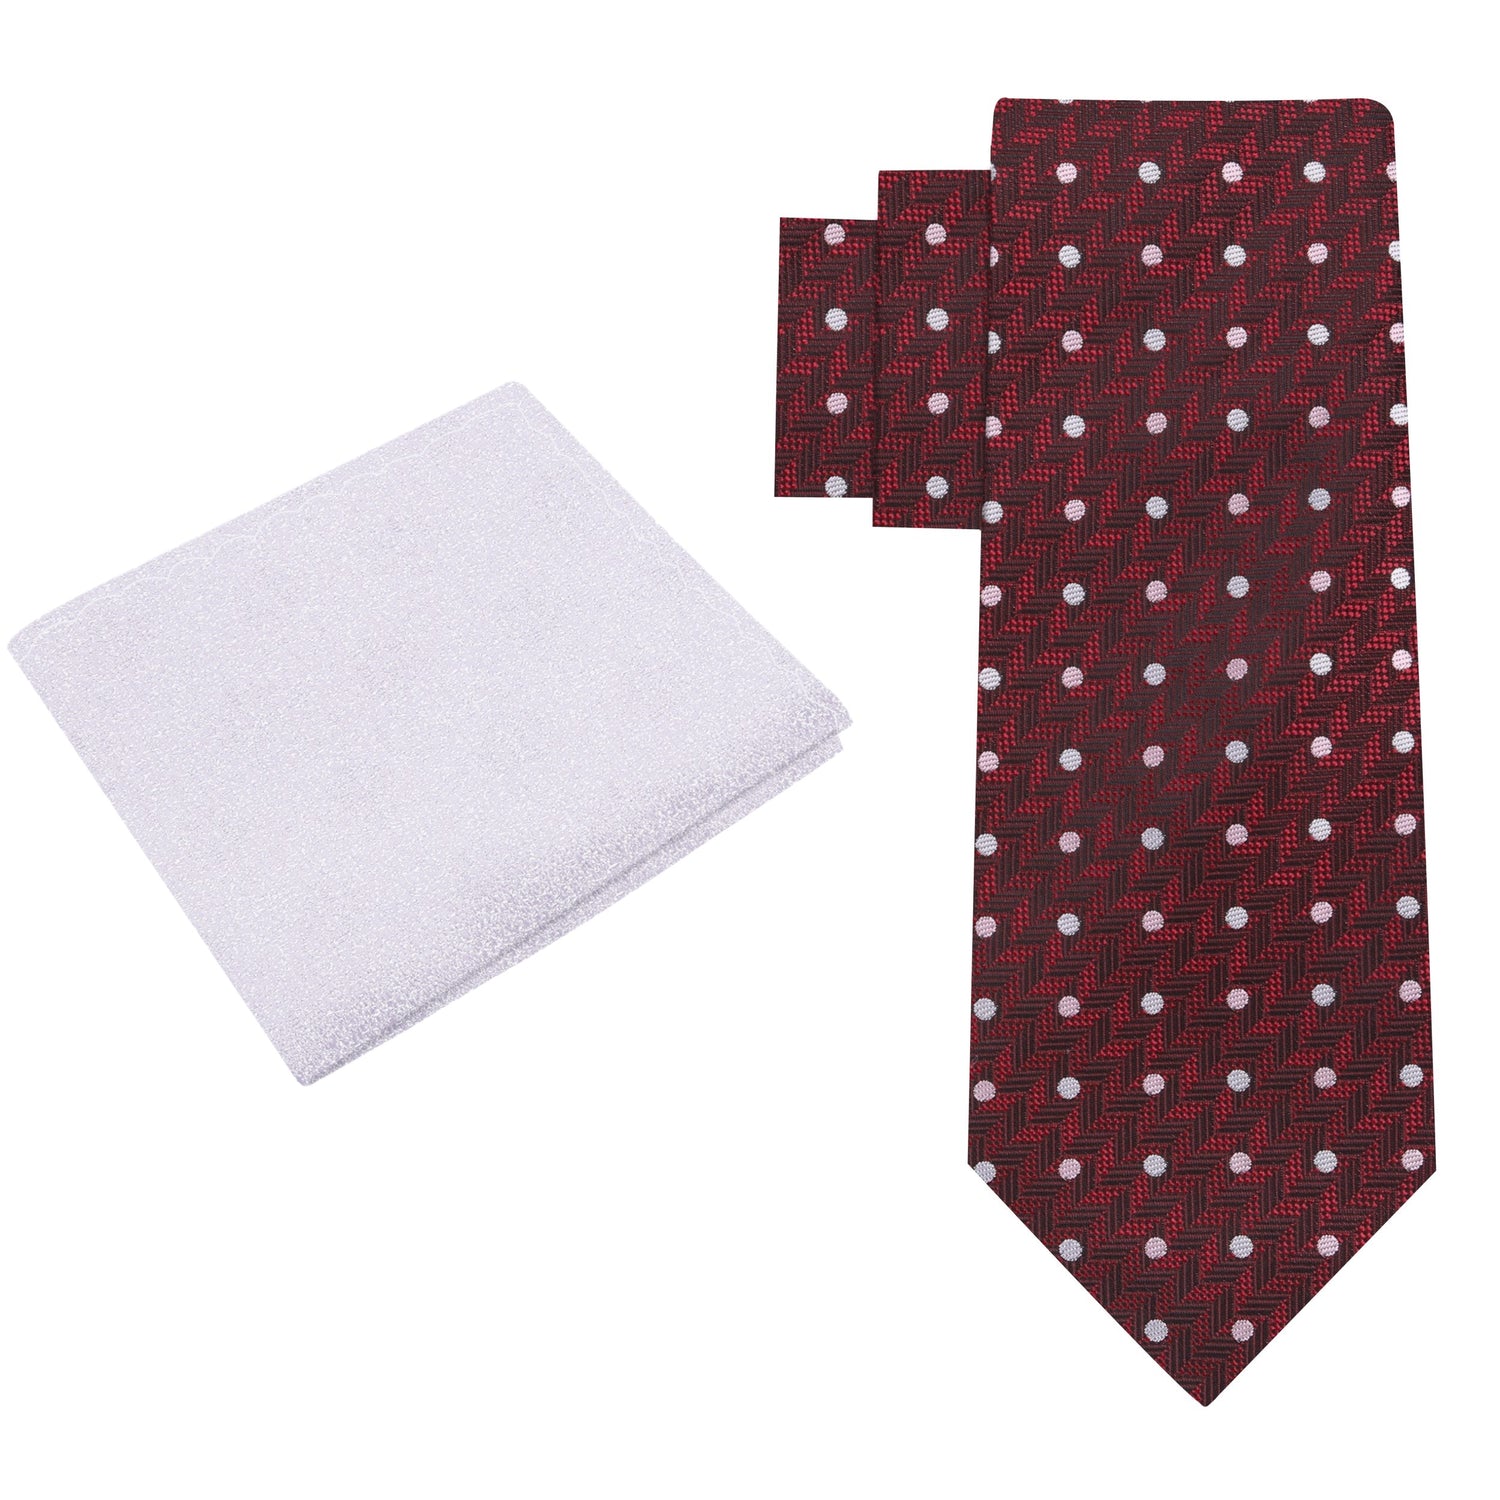 Alt View: Deep Red Herringbone with Dots Silk Necktie and Accenting Silver Square